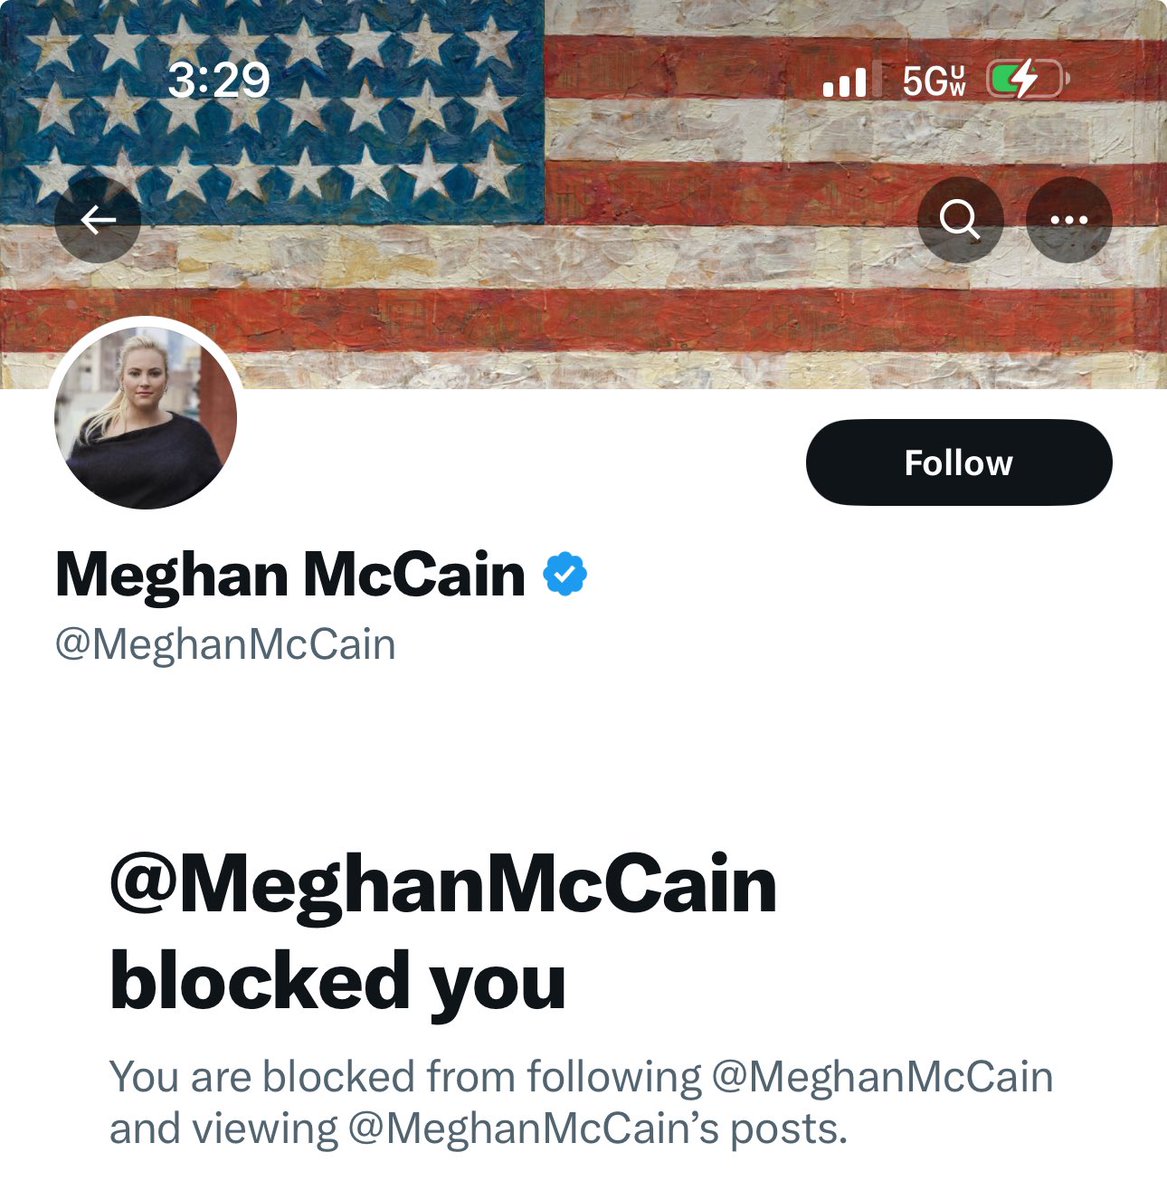 What did I do to you @MeghanMcCain? It was just a post to talk about you. I was not siding with @KariLake. Journalism is such a tough job. May God help us!